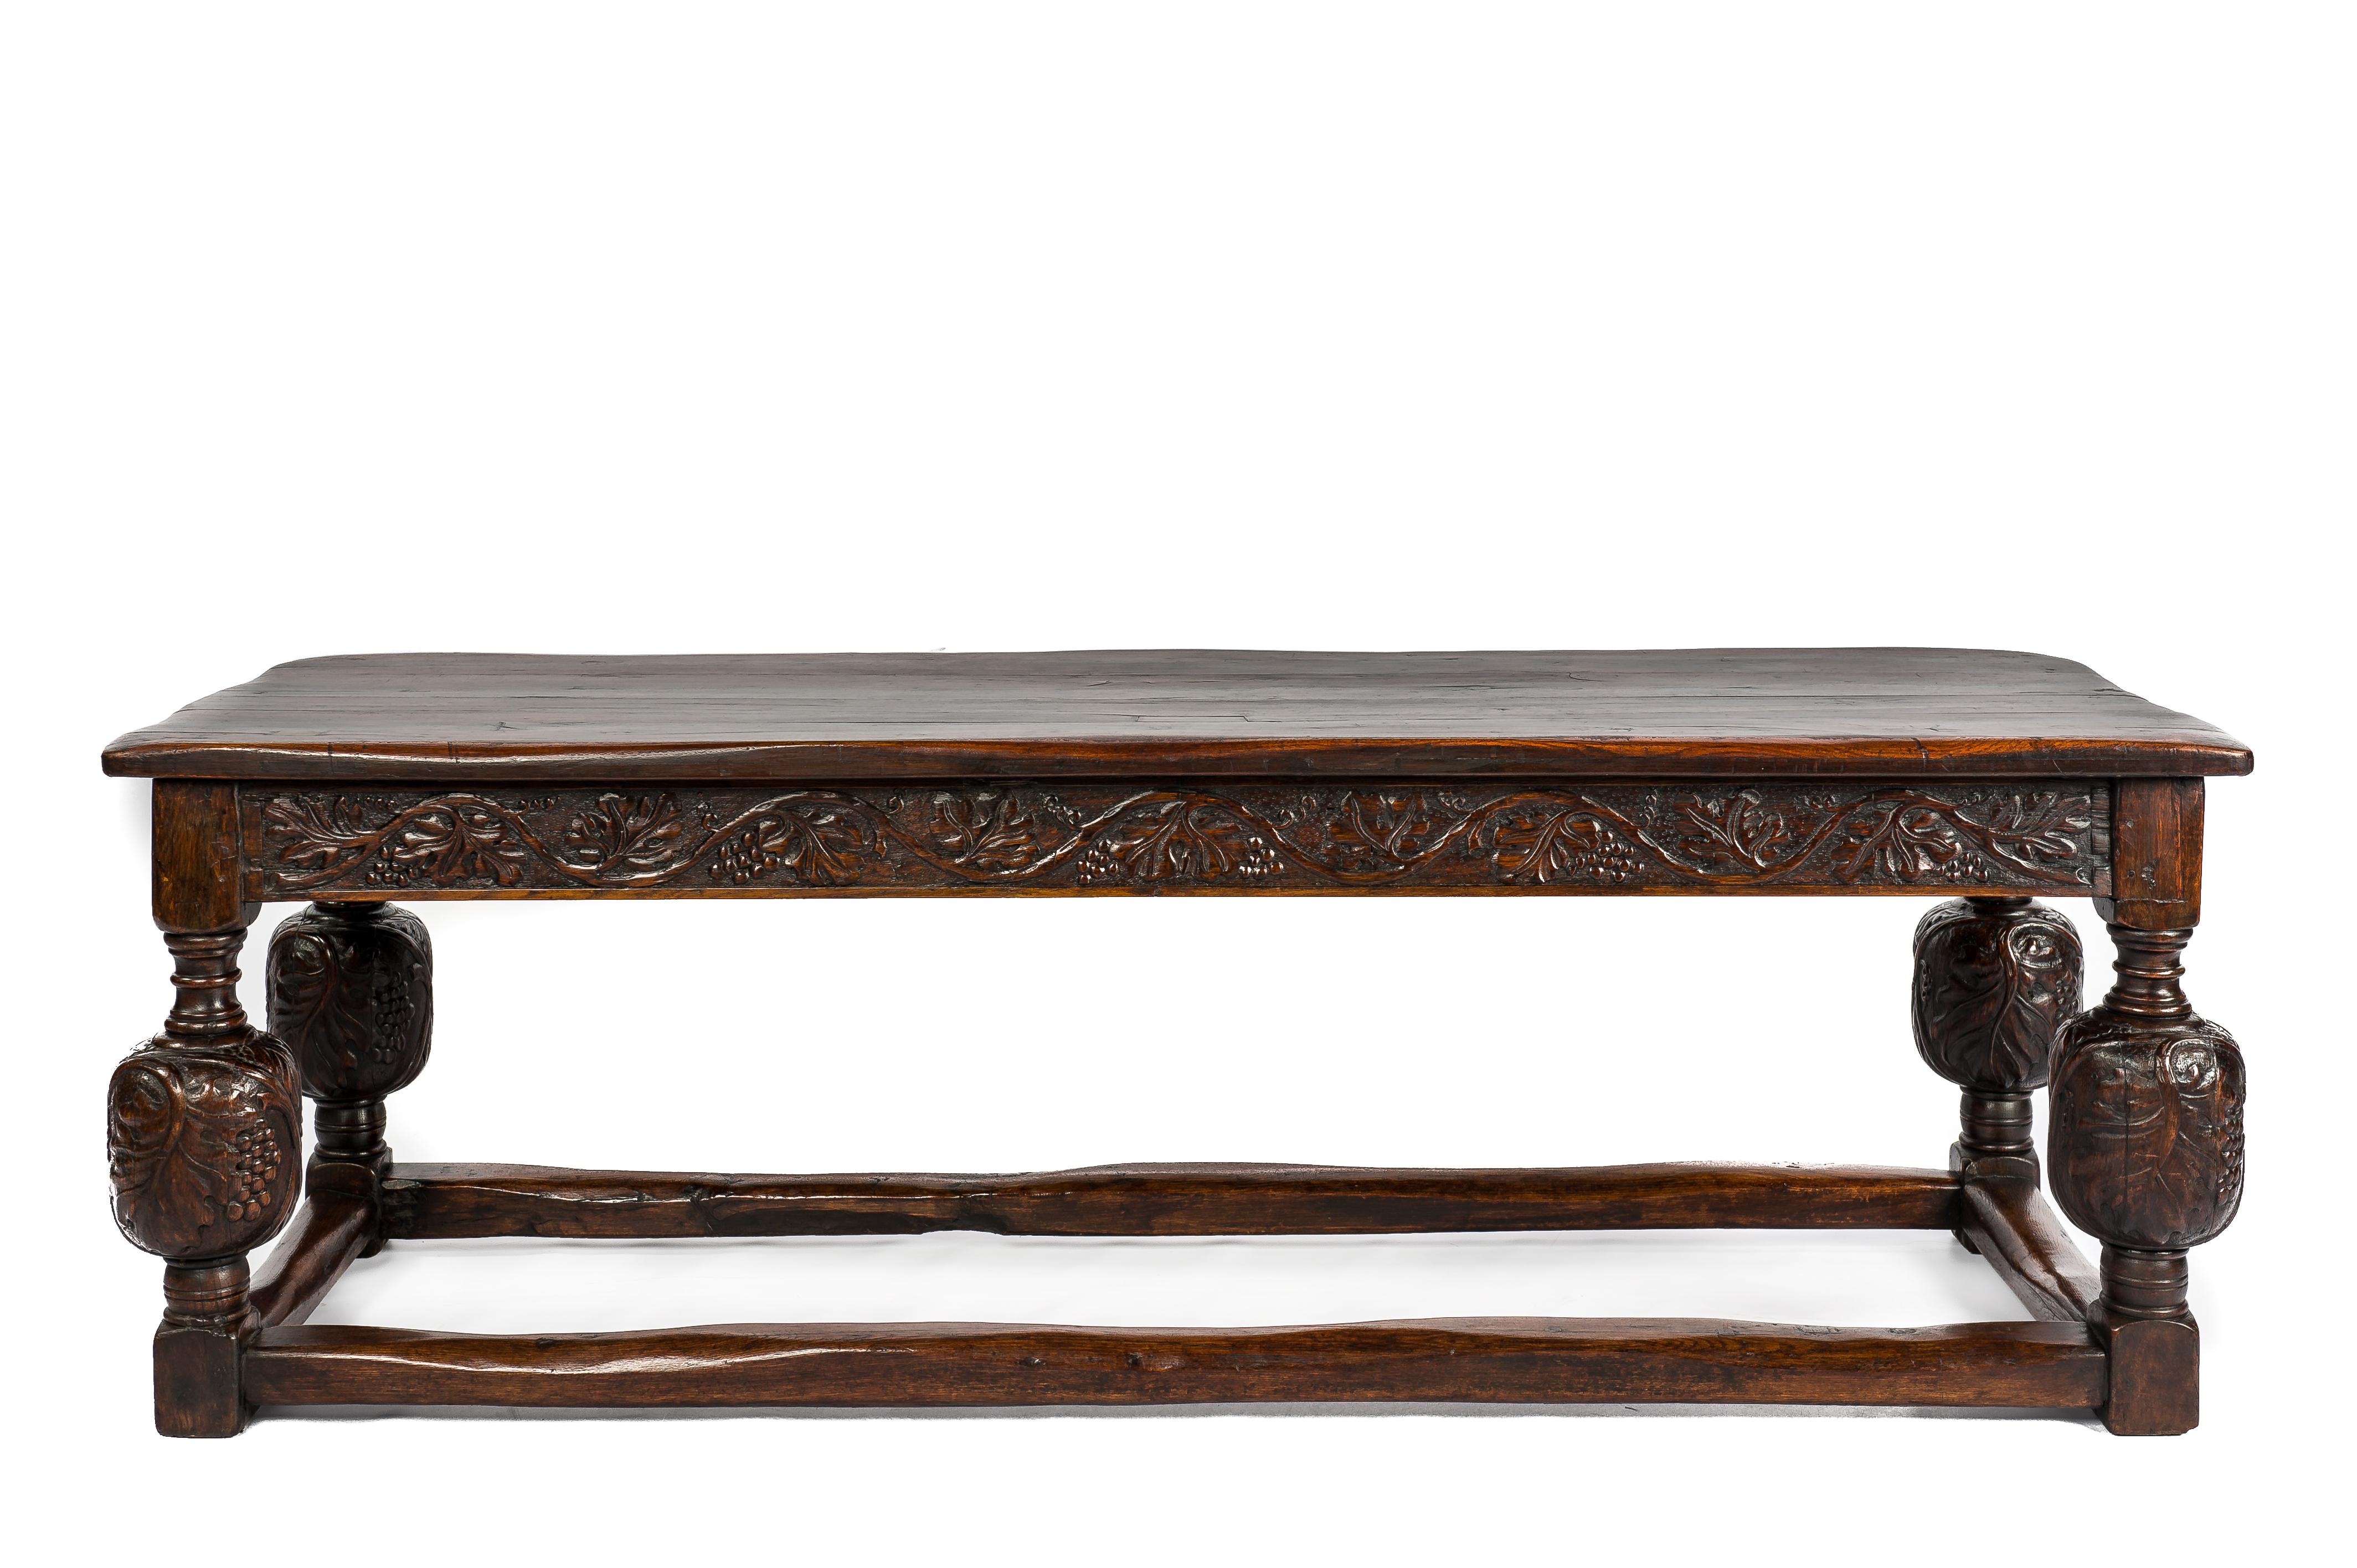 On offer here is a unique antique long table, an early 18th-century masterpiece from England. Crafted in the Elizabethan style, this table adds a touch of heritage and sophistication to any space. Dating back to around 1700, this long table captures